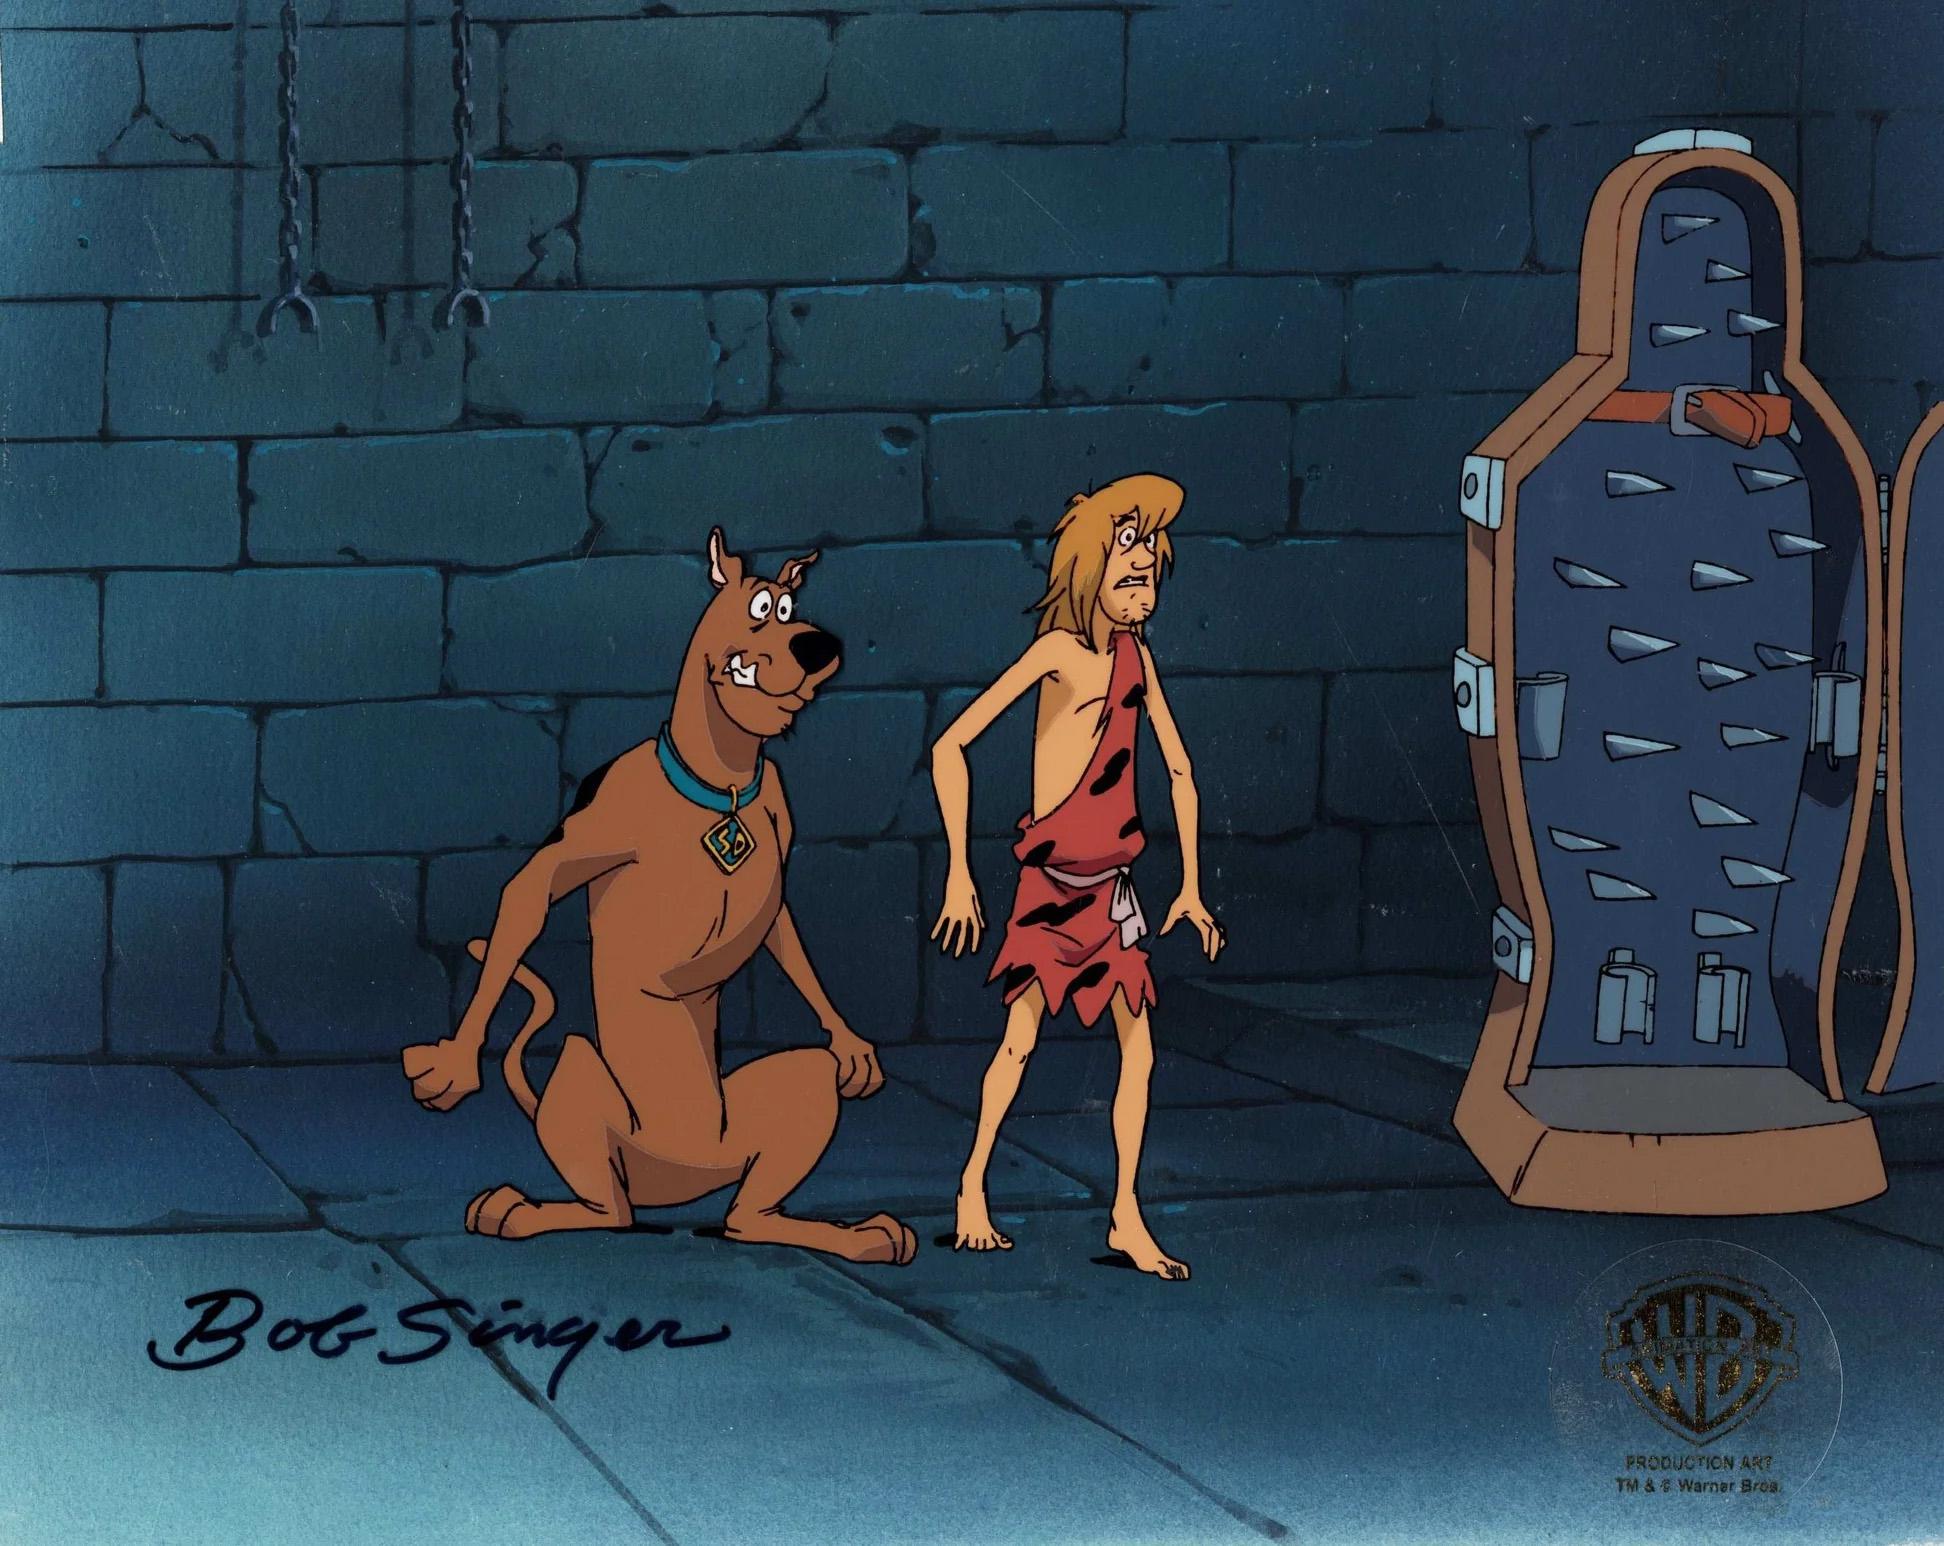 Scooby Doo Original Cel and Background: Scooby, Shaggy signed by Bob Singer - Art by Warner Bros. Studio Artists